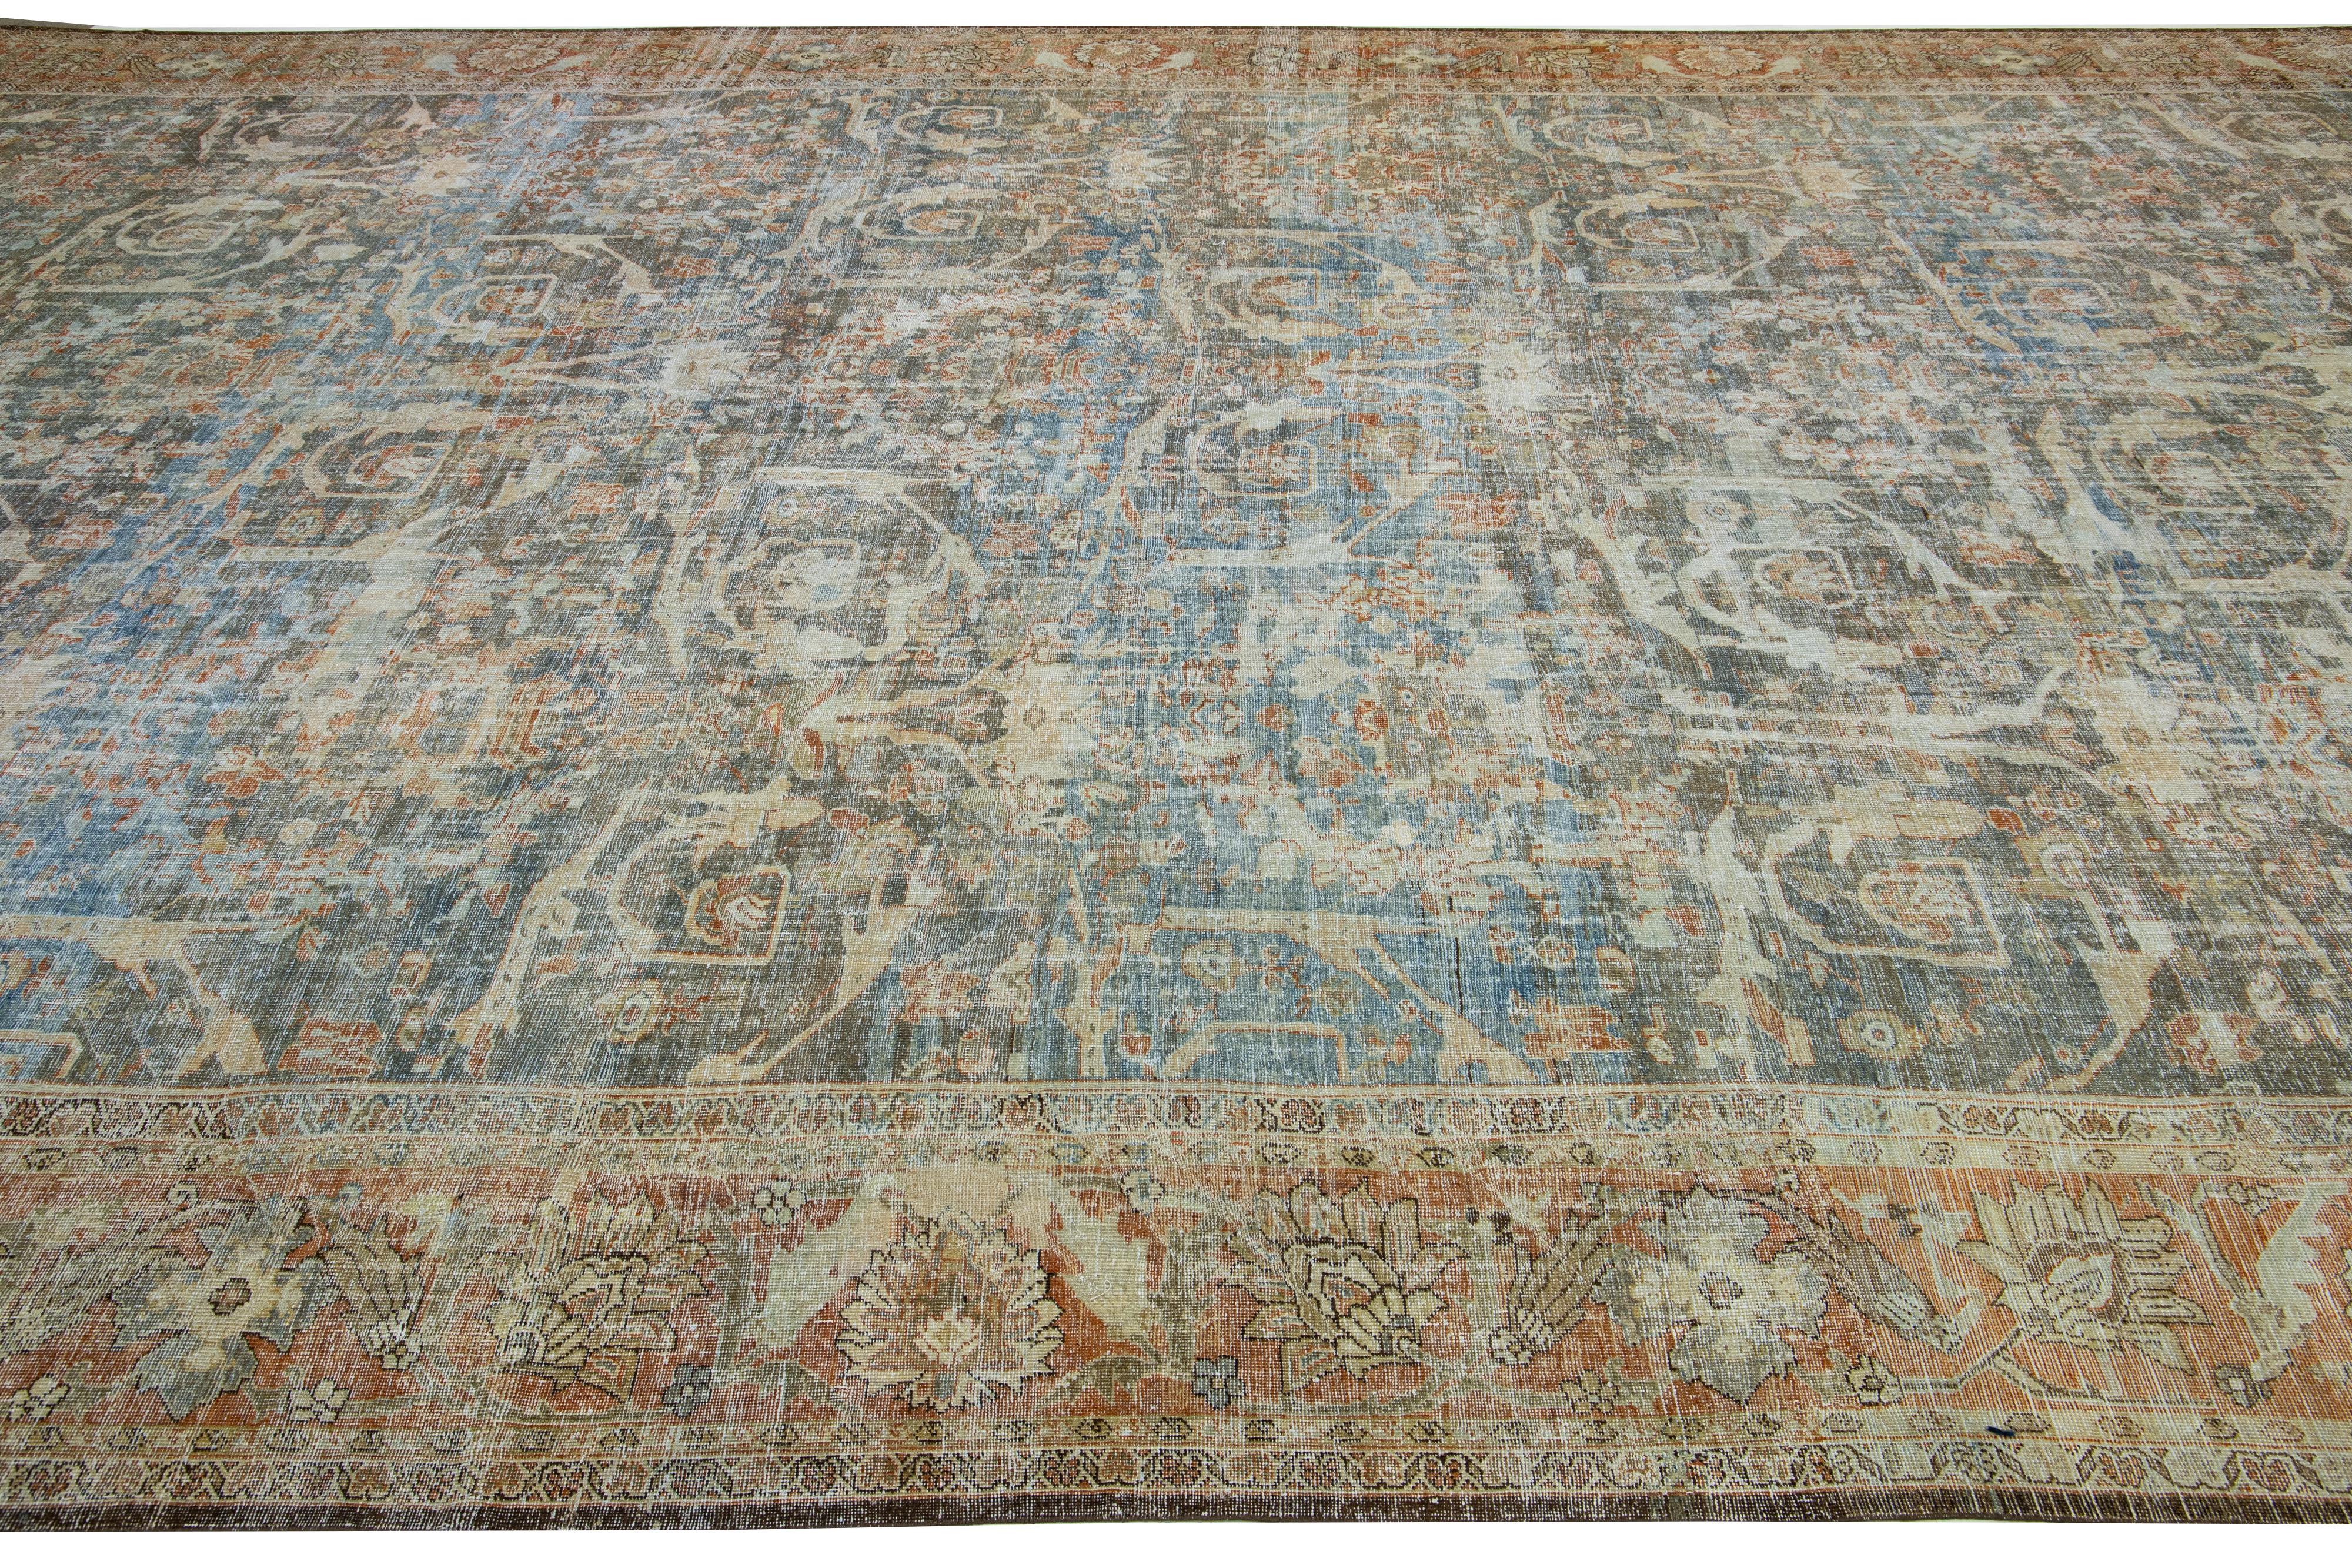 Handmade 1890s Blue Persian Mahal Extra Large Wool Rug with Allover Design In Good Condition For Sale In Norwalk, CT